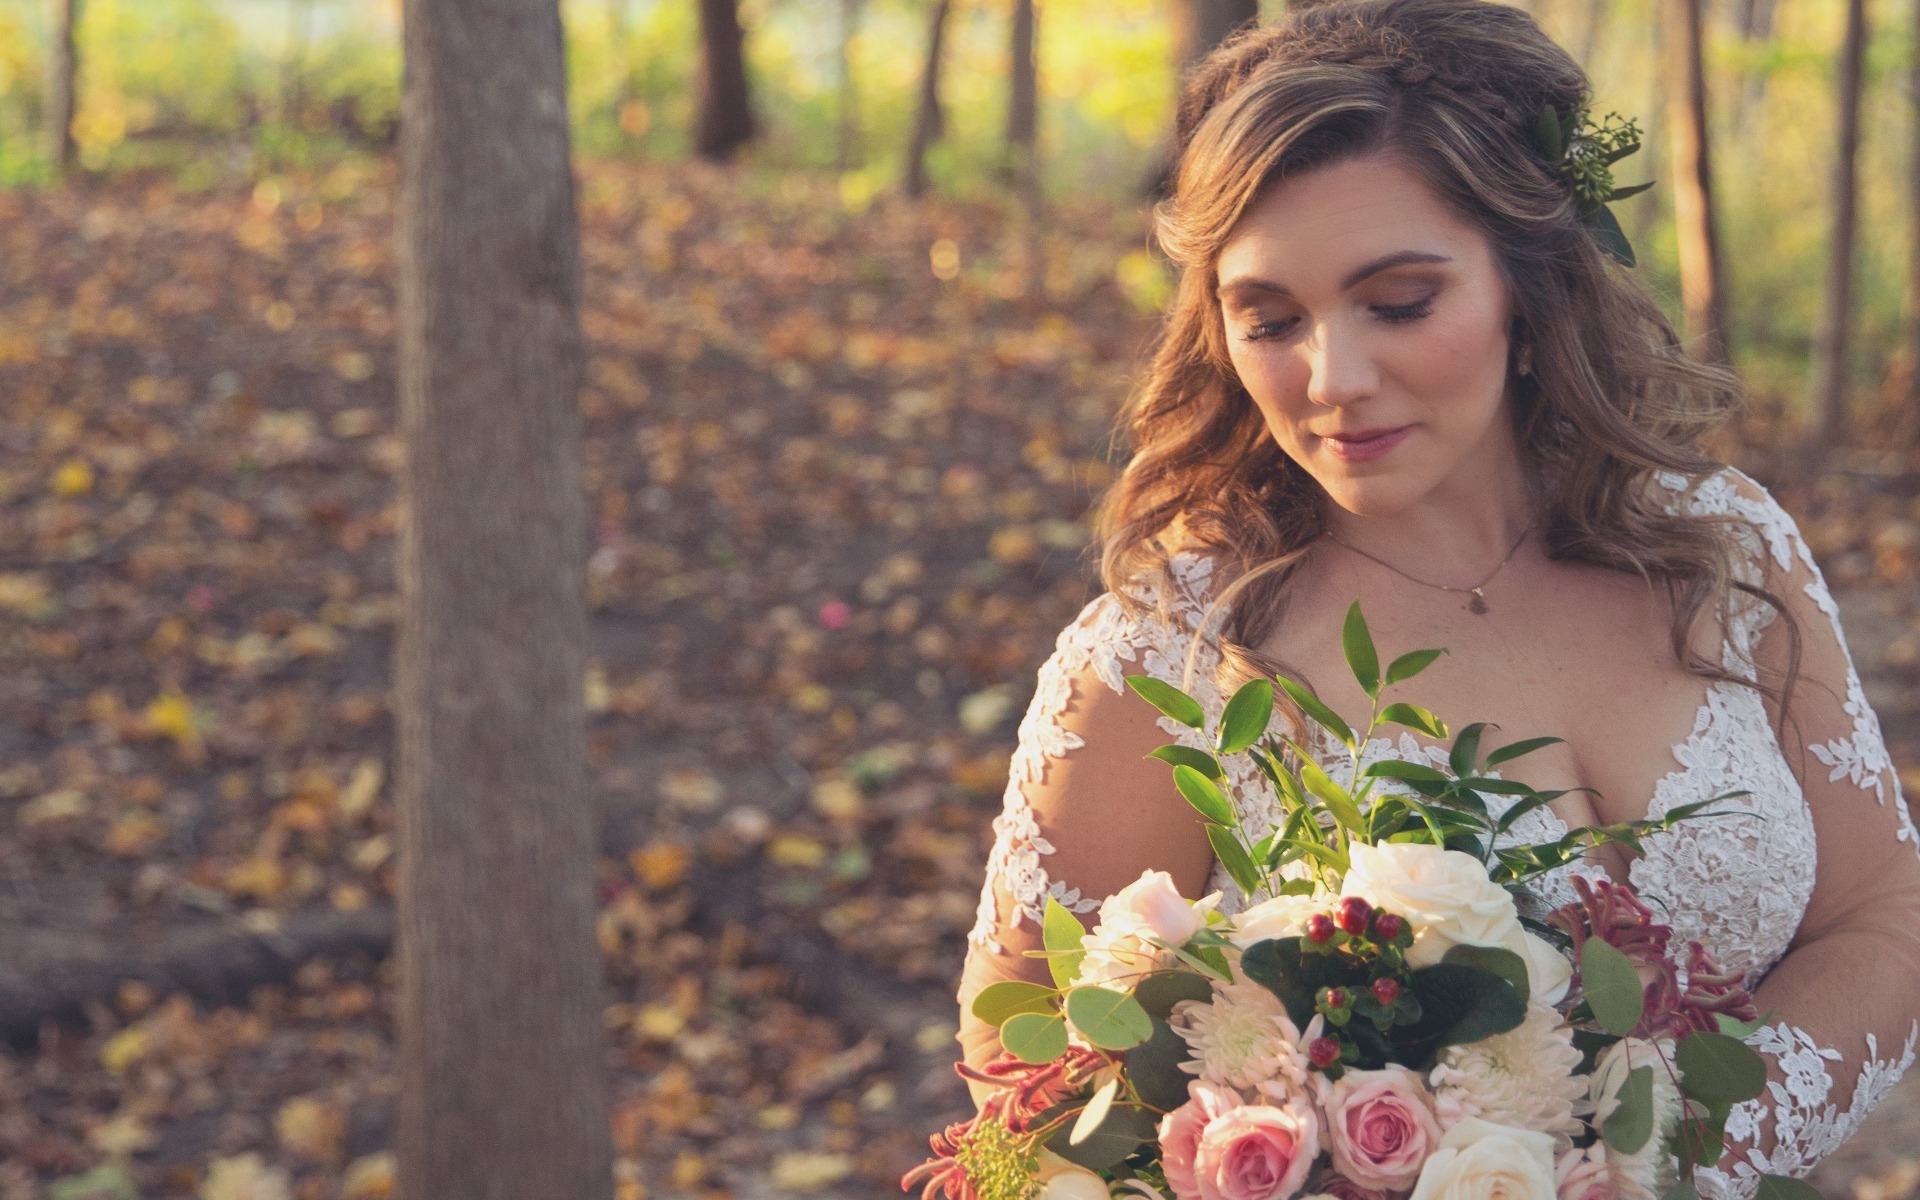 bride looks down at her bouquet in a fall setting